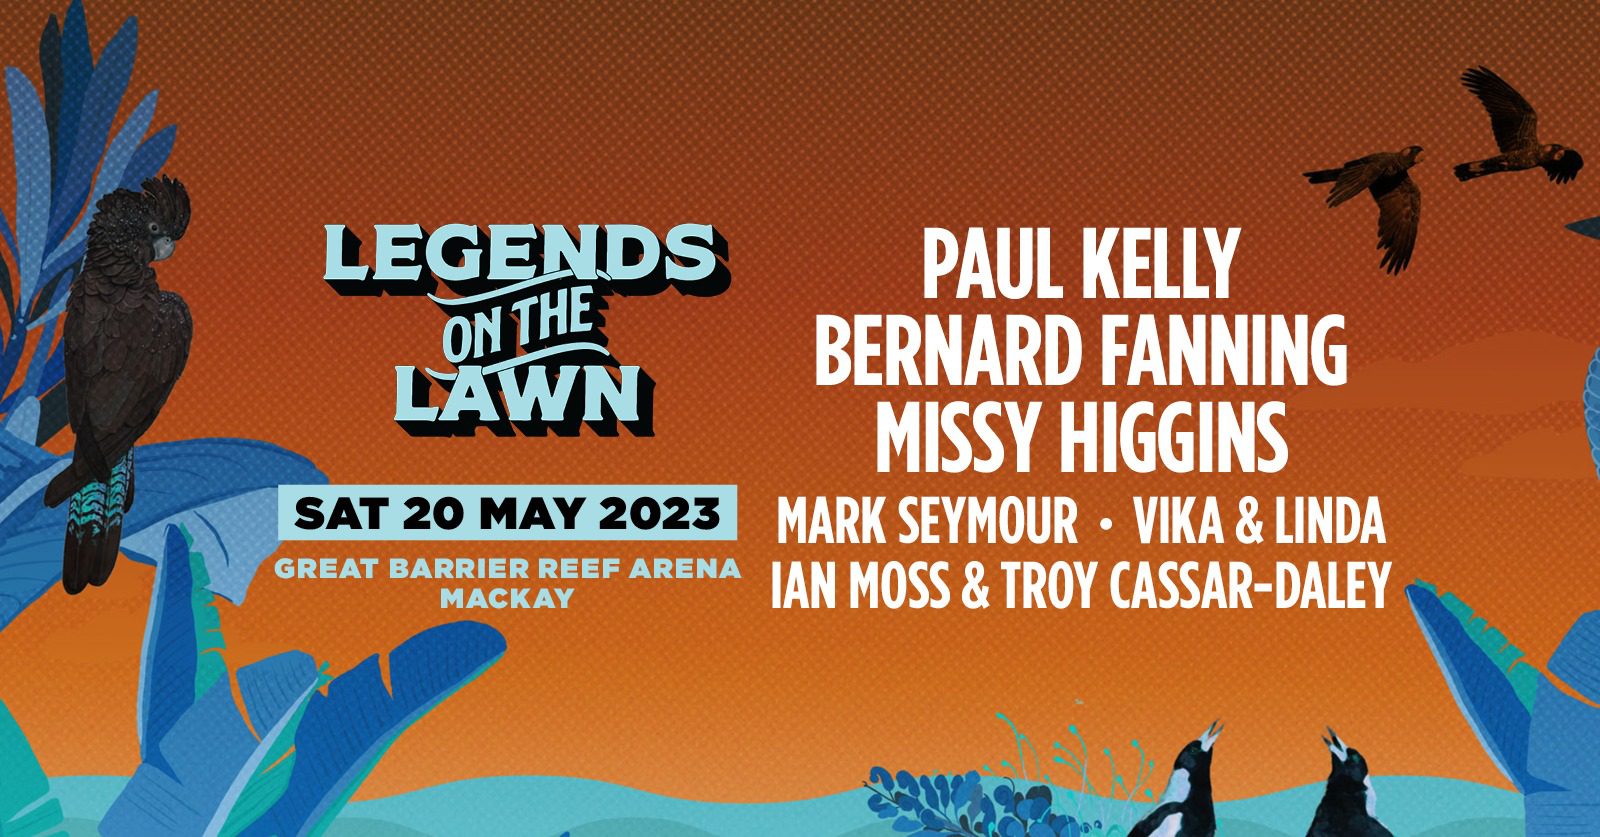 Event Poster for Legends on the Lawn 2023 | Mackay | EventsontheHorizon.com